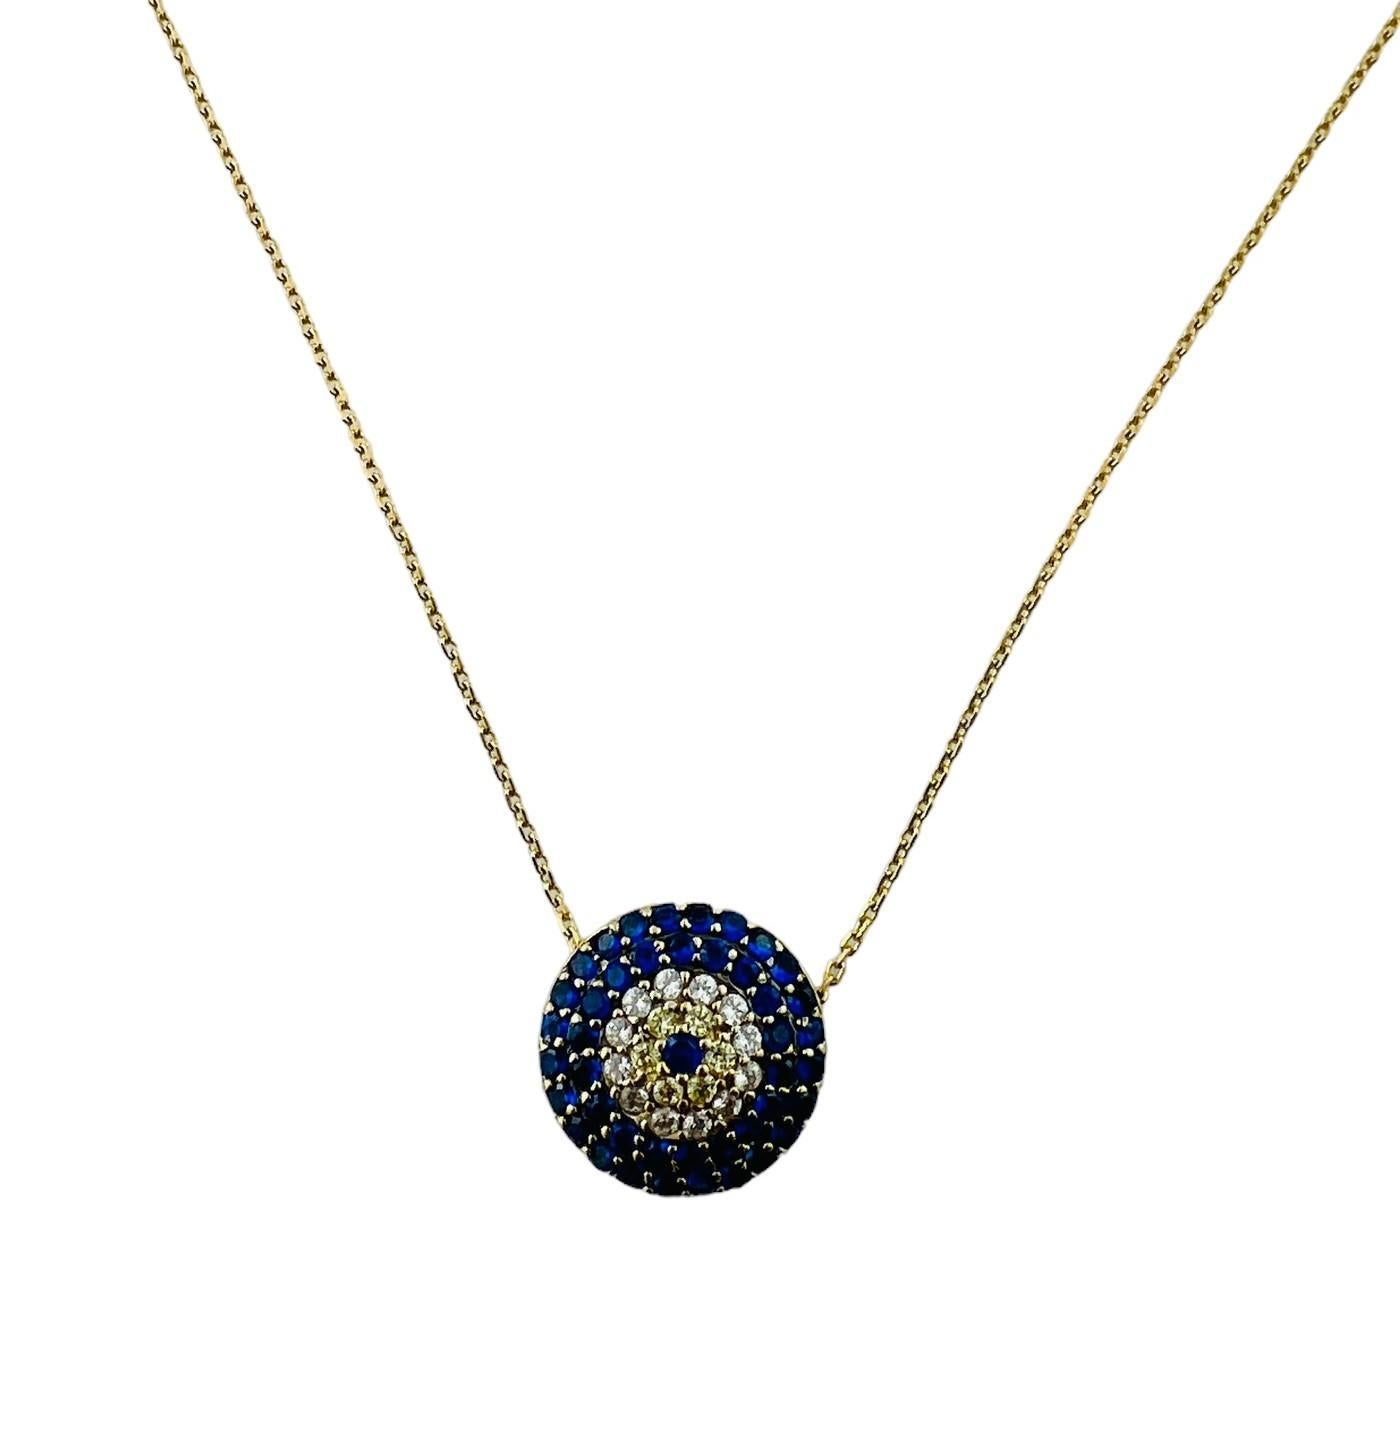 14K Yellow Gold Faceted Blue White Yellow Glass Stone Pendant Necklace #15627